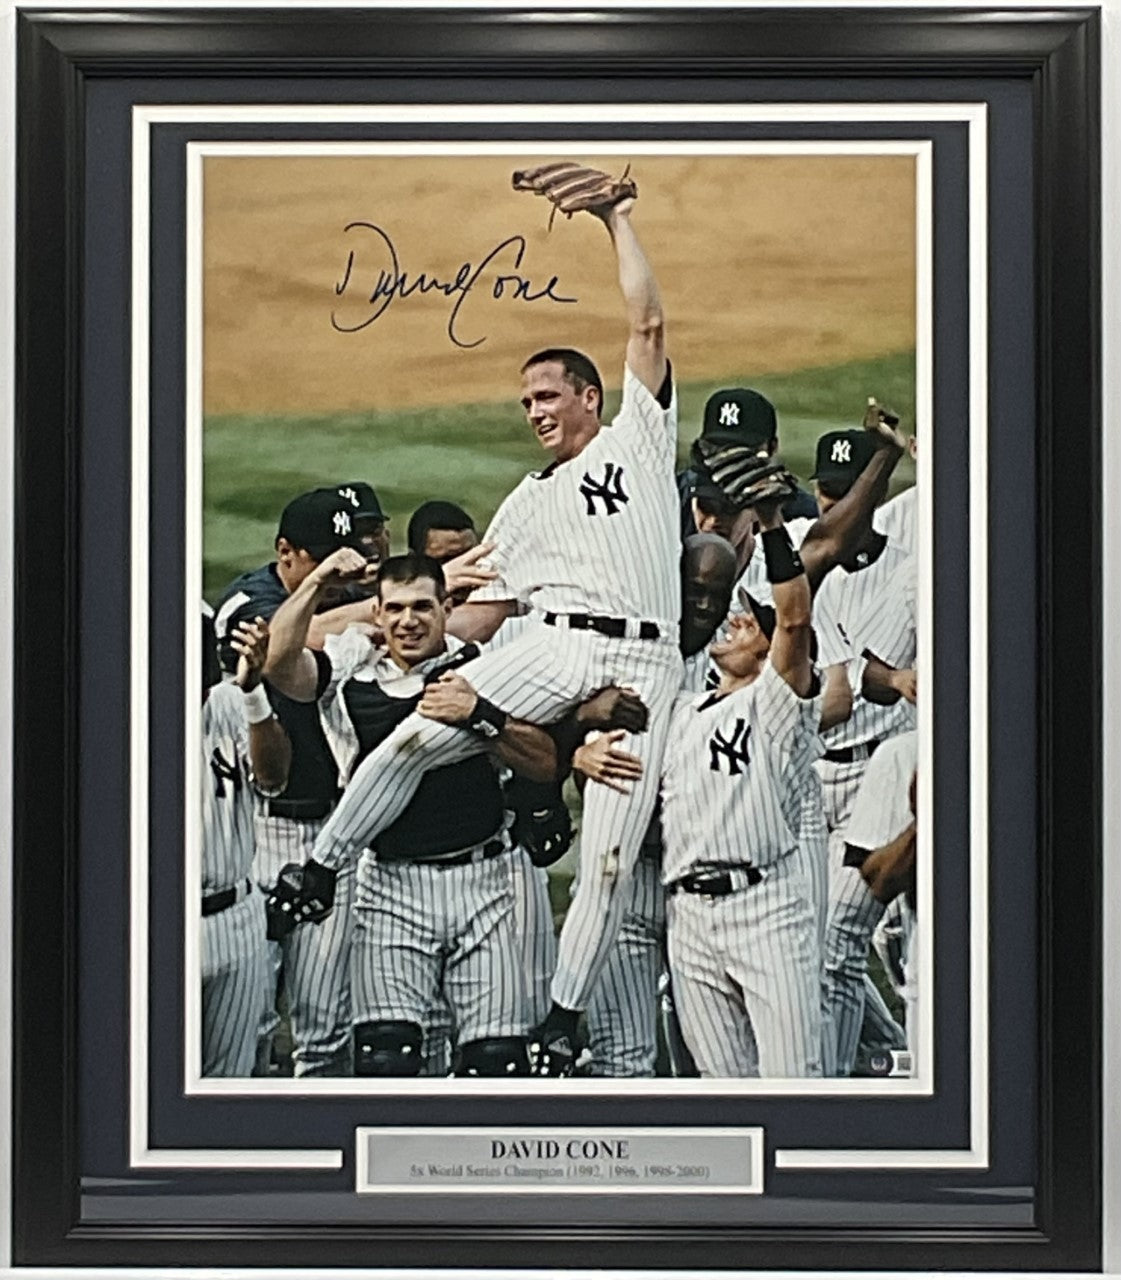 David Cone New York Yankees Autographed 16x20 "Perfect Game" Photo Framed